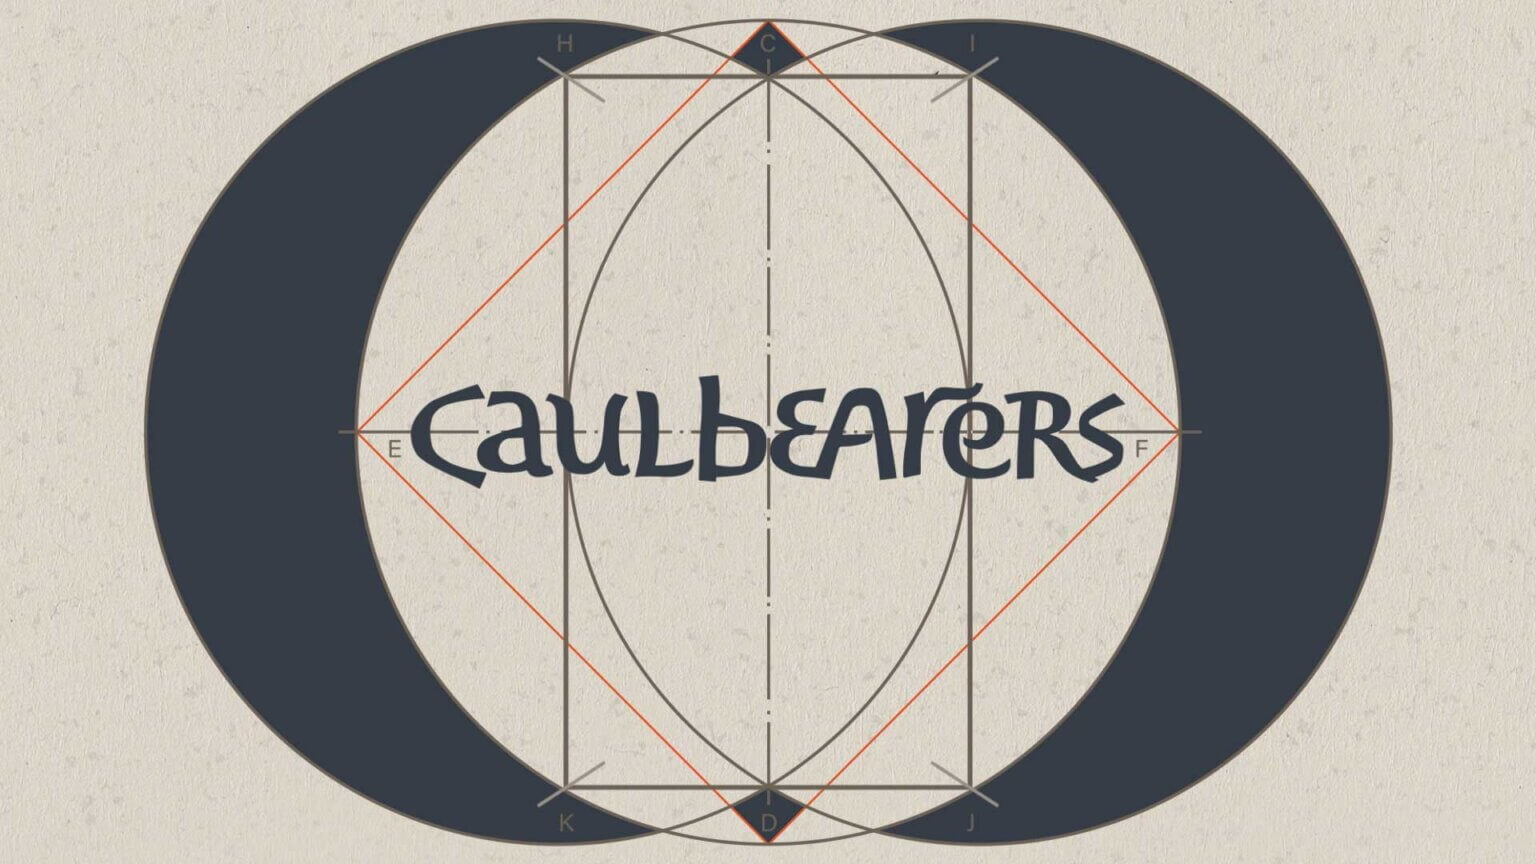 "Over Comes A Cloud" by Caulbearers is Northern Transmissions Song of the Day.